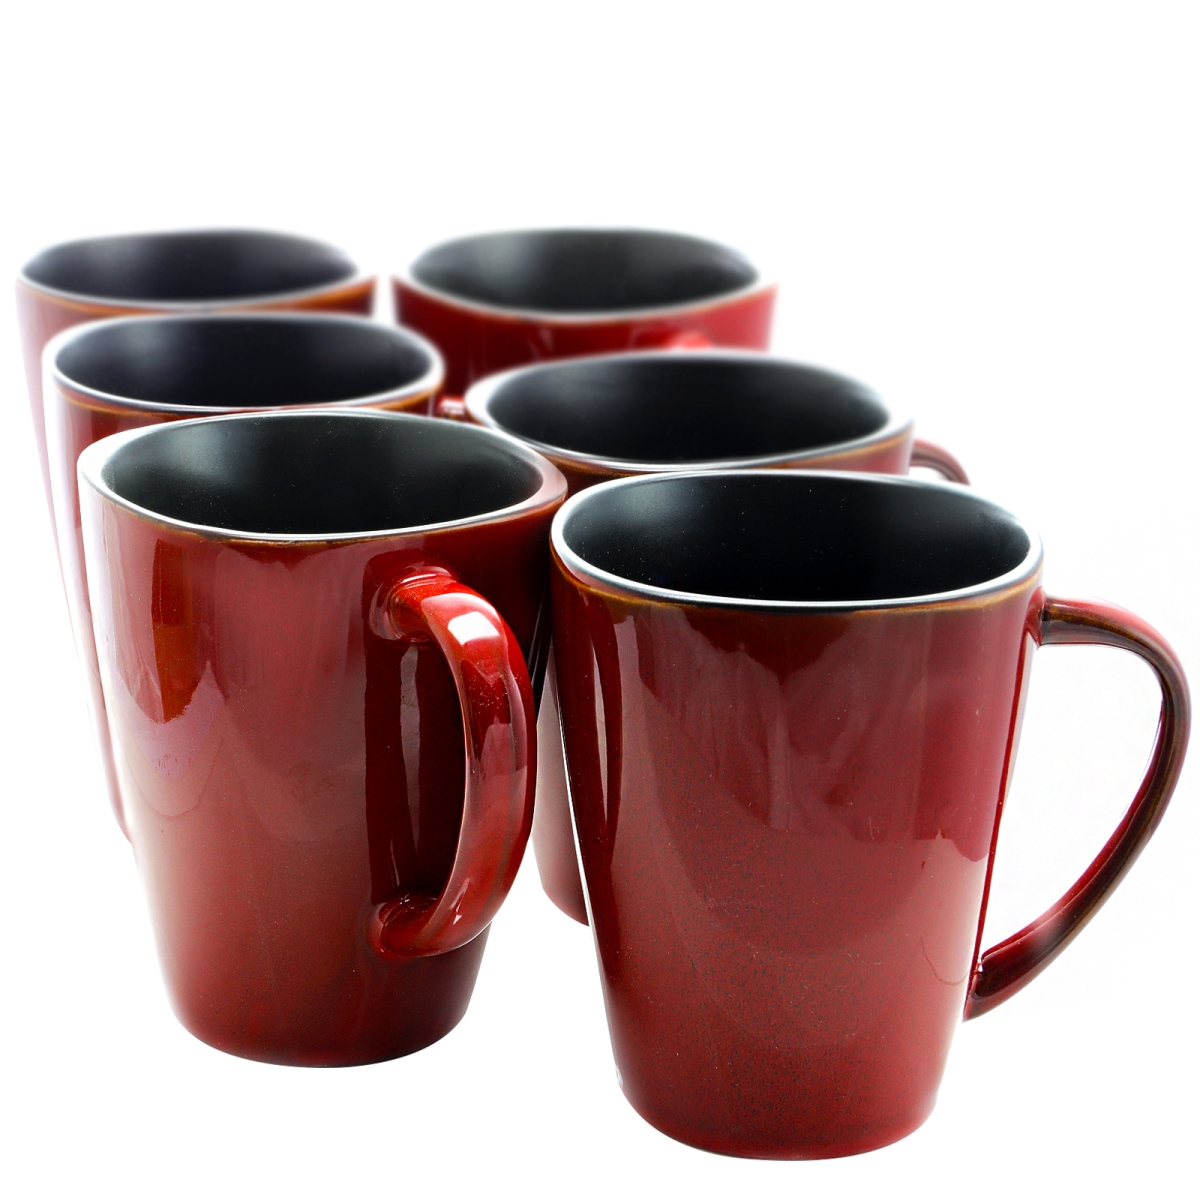 Harland-6pc-cups Harland Luxe & Dinner Mugs, Large - 6 Piece